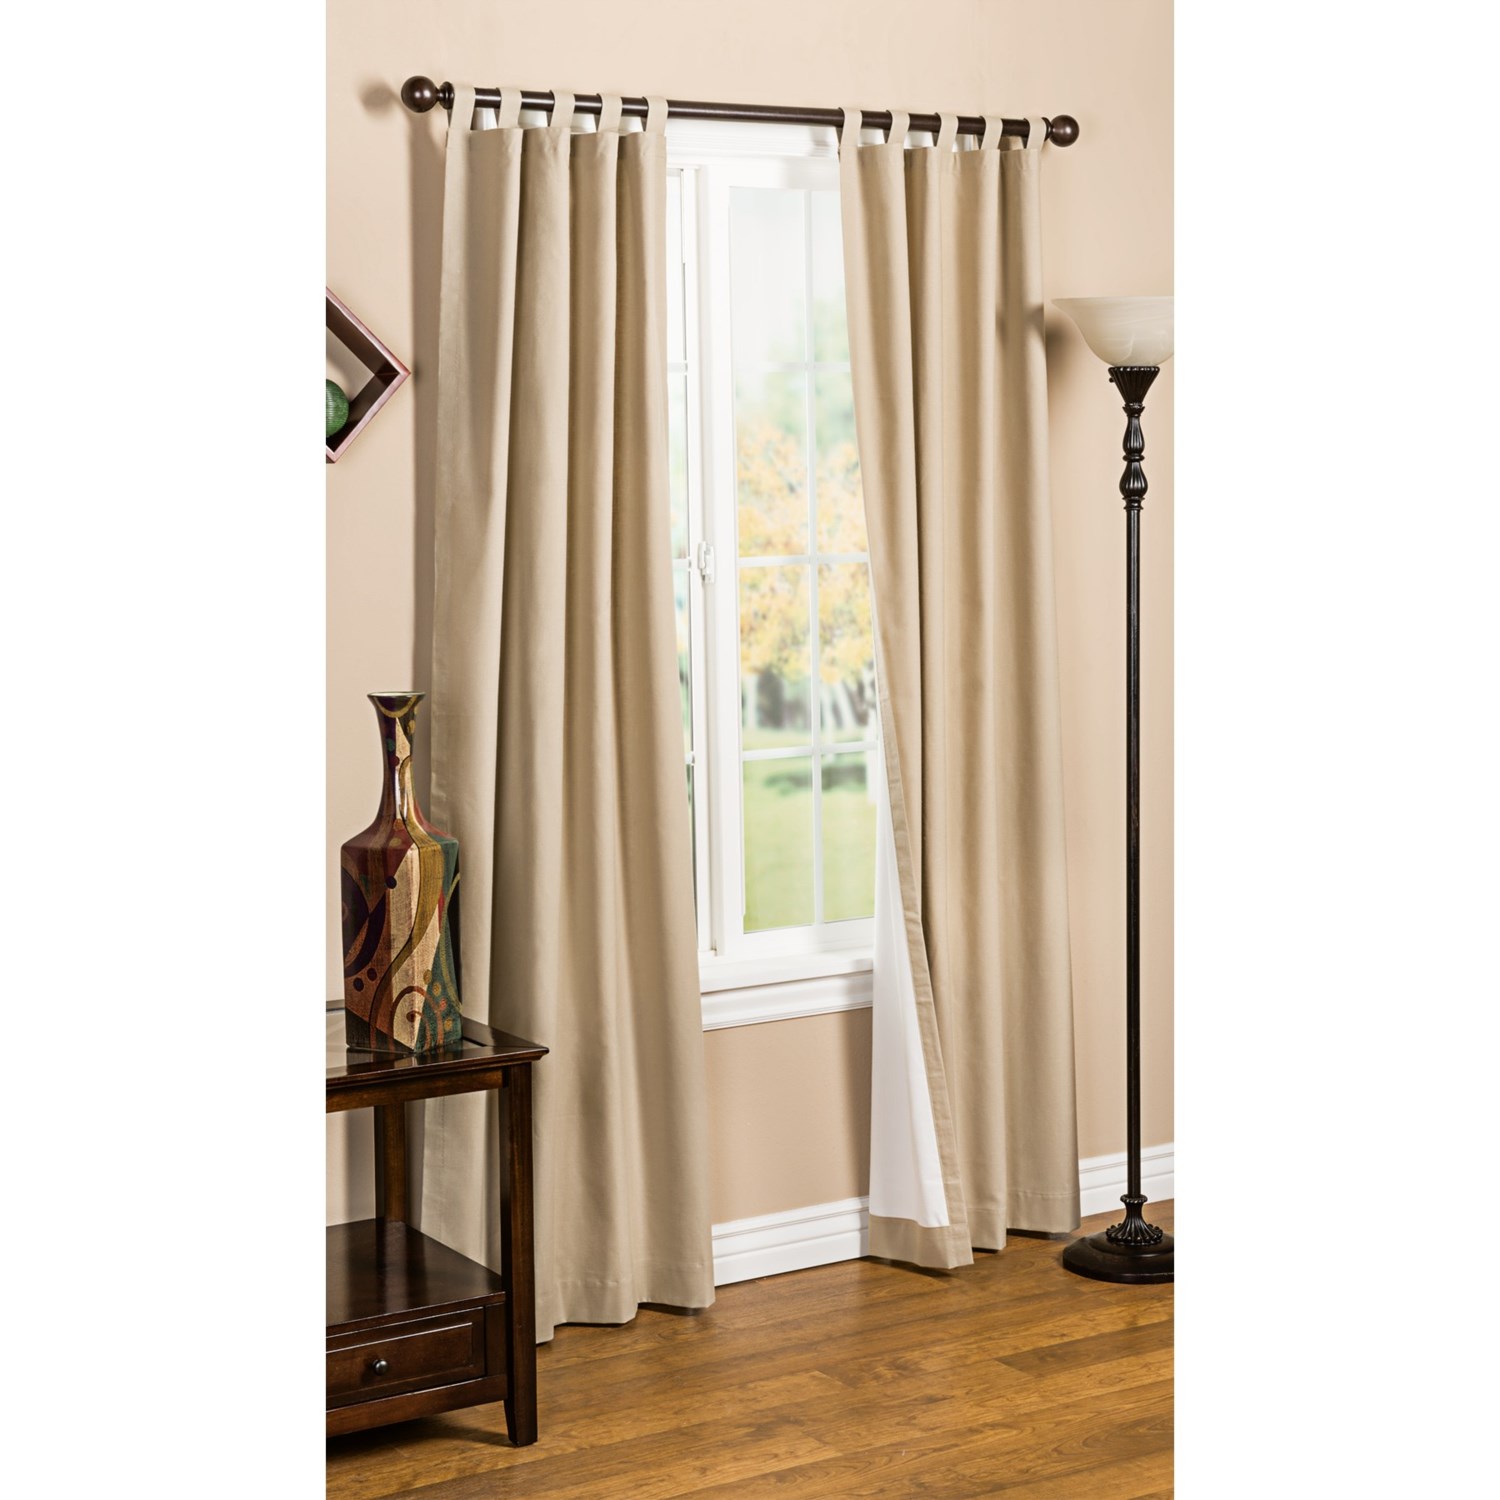 Commonwealth Thermal-lined Tab Top Curtain Panels 94025 - Save 61%